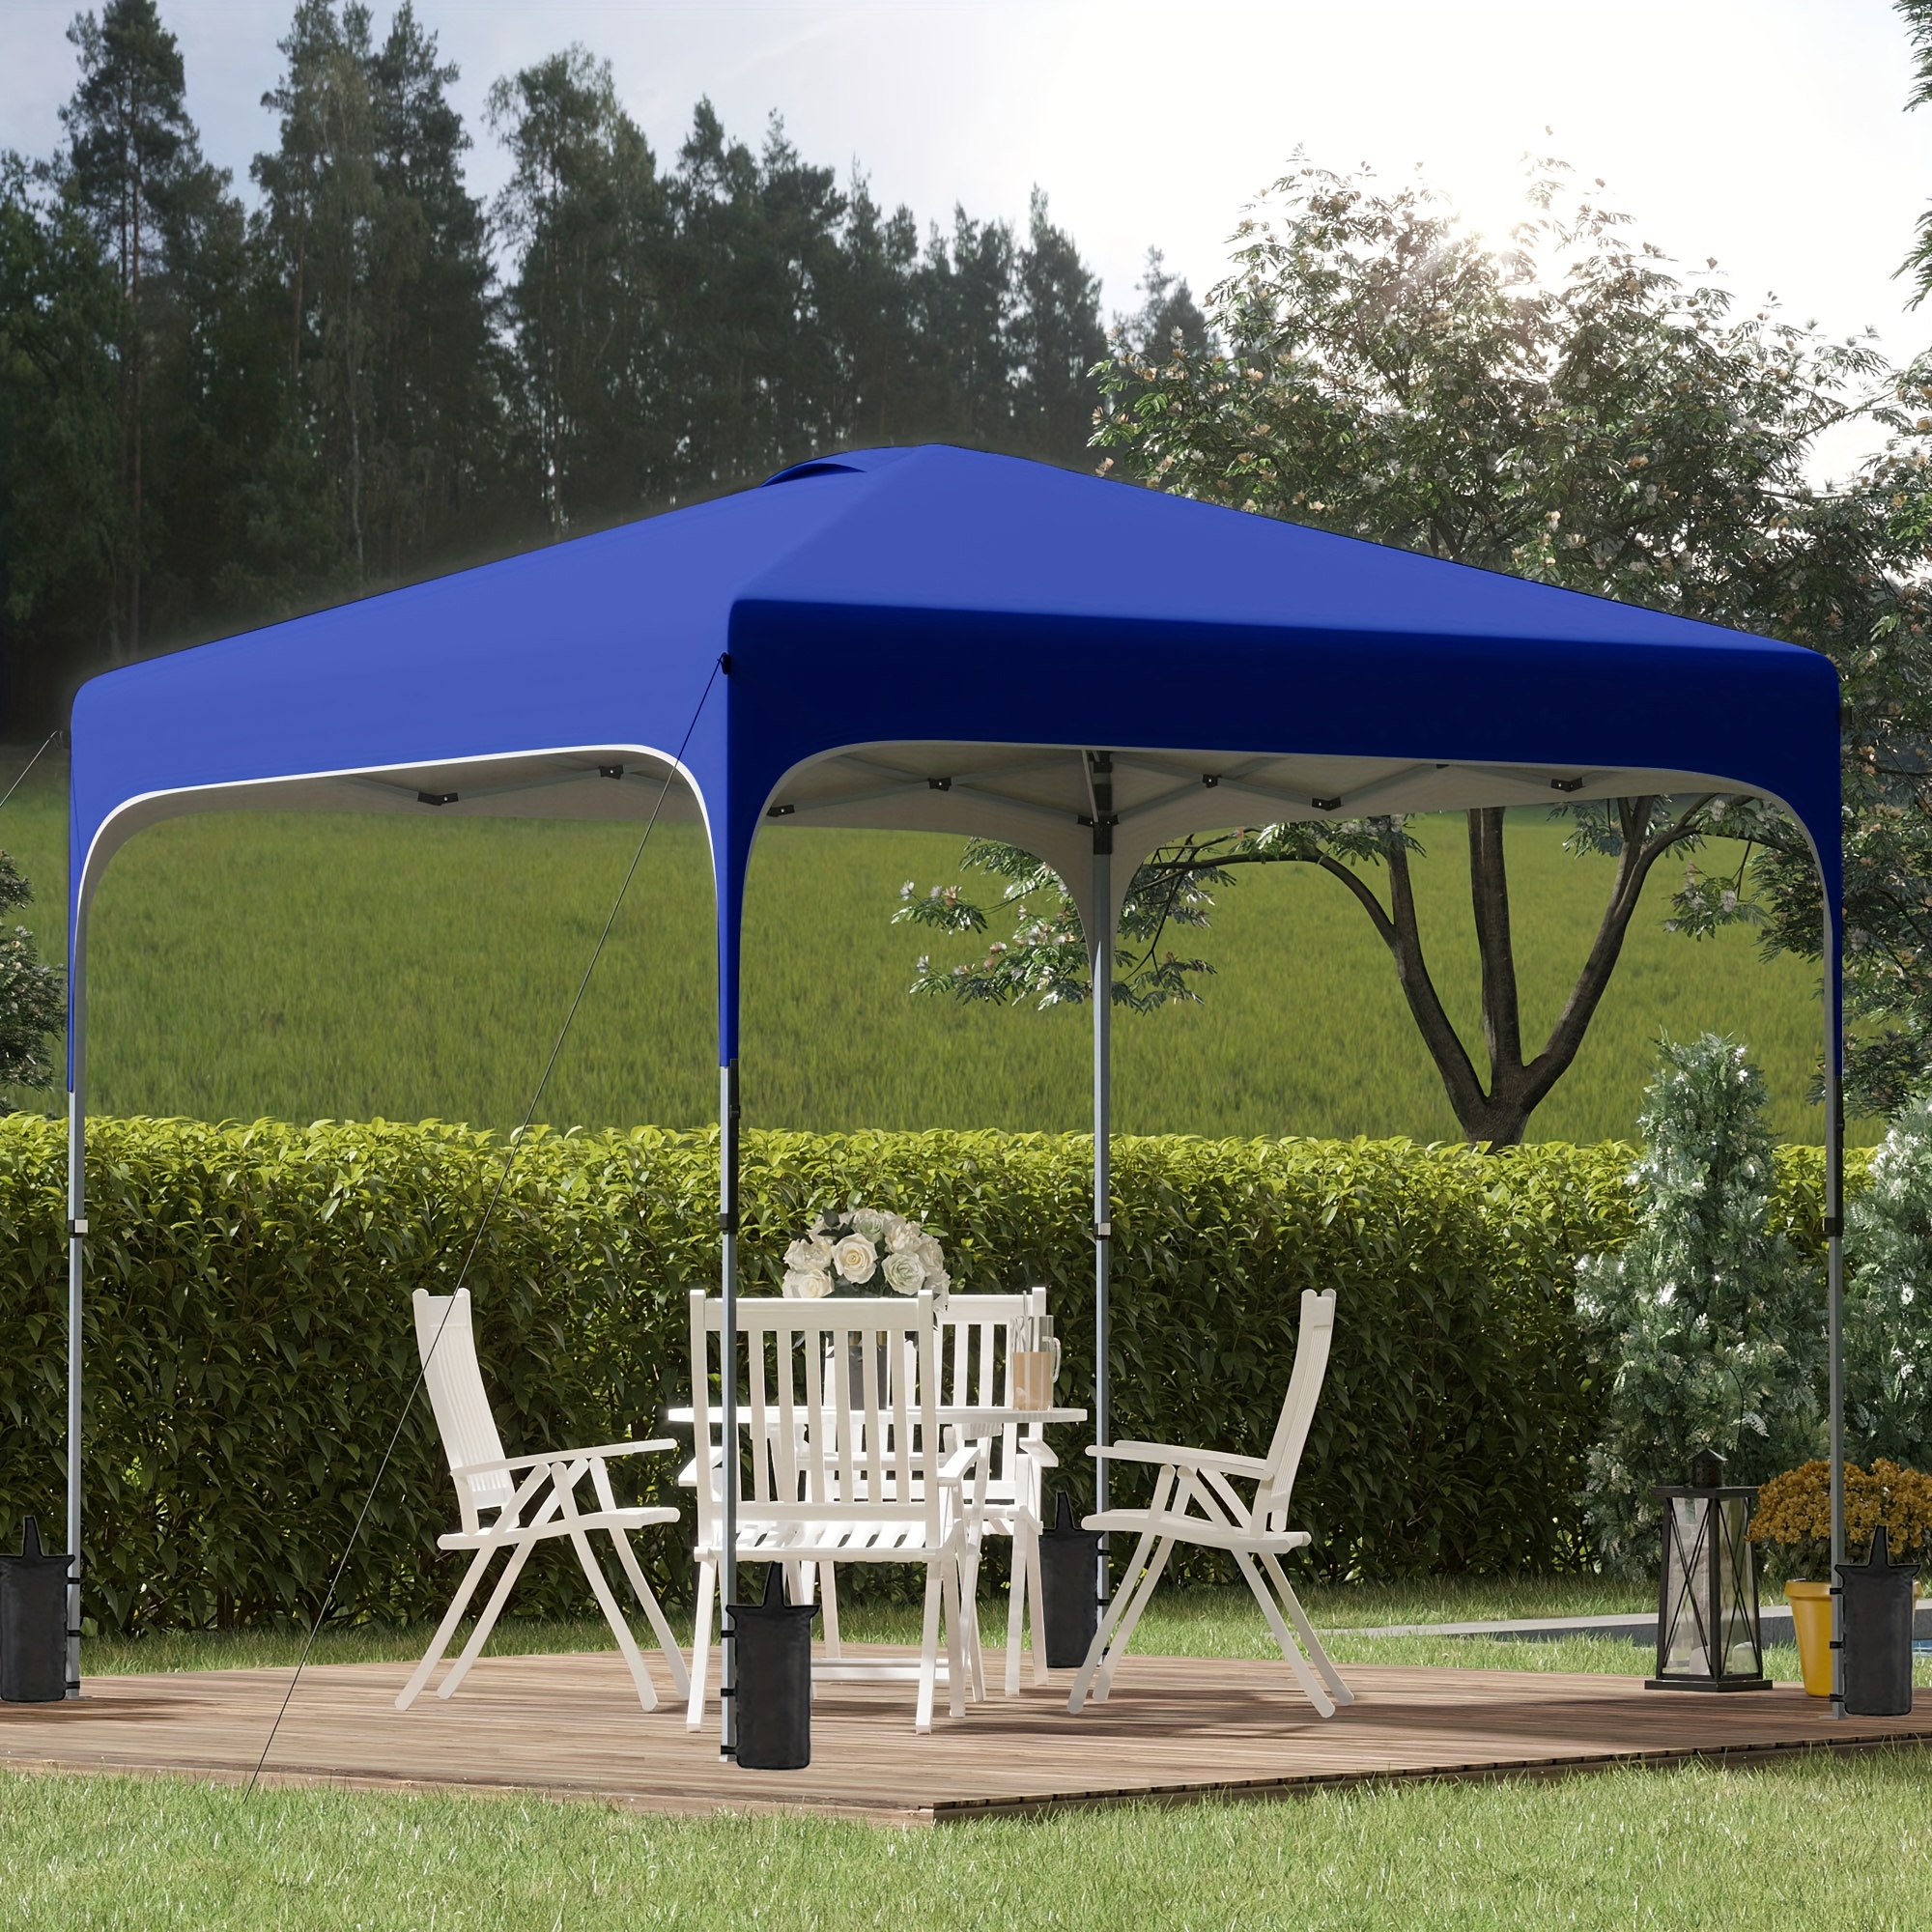 

Outsunny 8' X 8' Pop Up Canopy Tent With Wheeled Carry Bag And 4 Sand Bags, Instant Sun Shelter, Tents For Parties, Height Adjustable, For Outdoor, Garden, Patio, Royal Blue